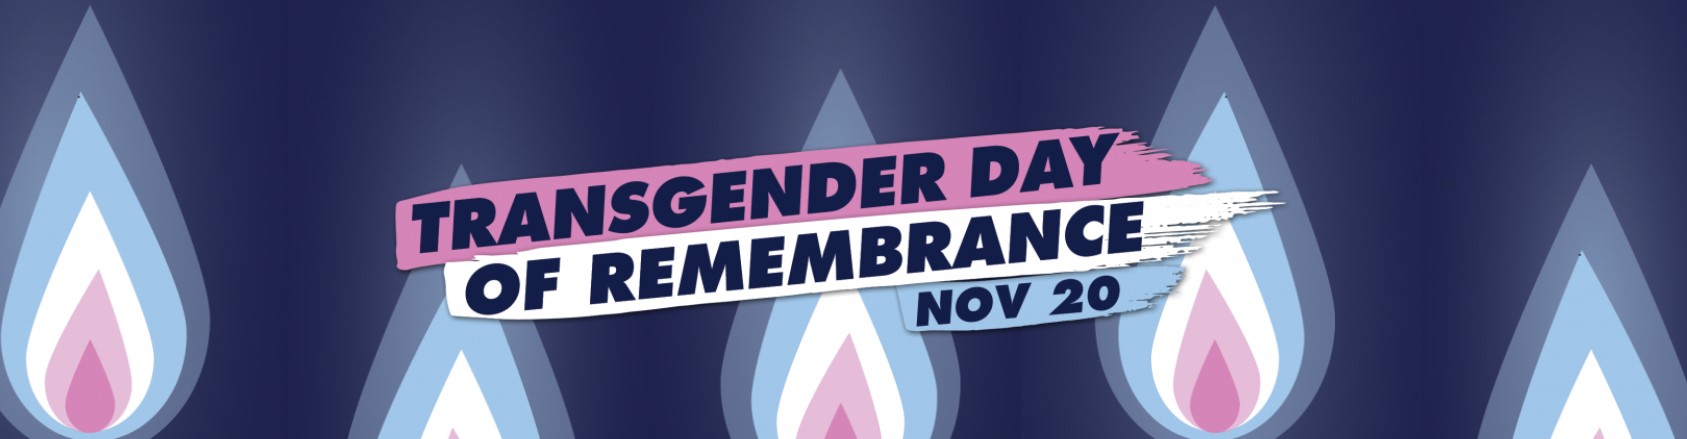 What is Transgender Day of Remembrance?